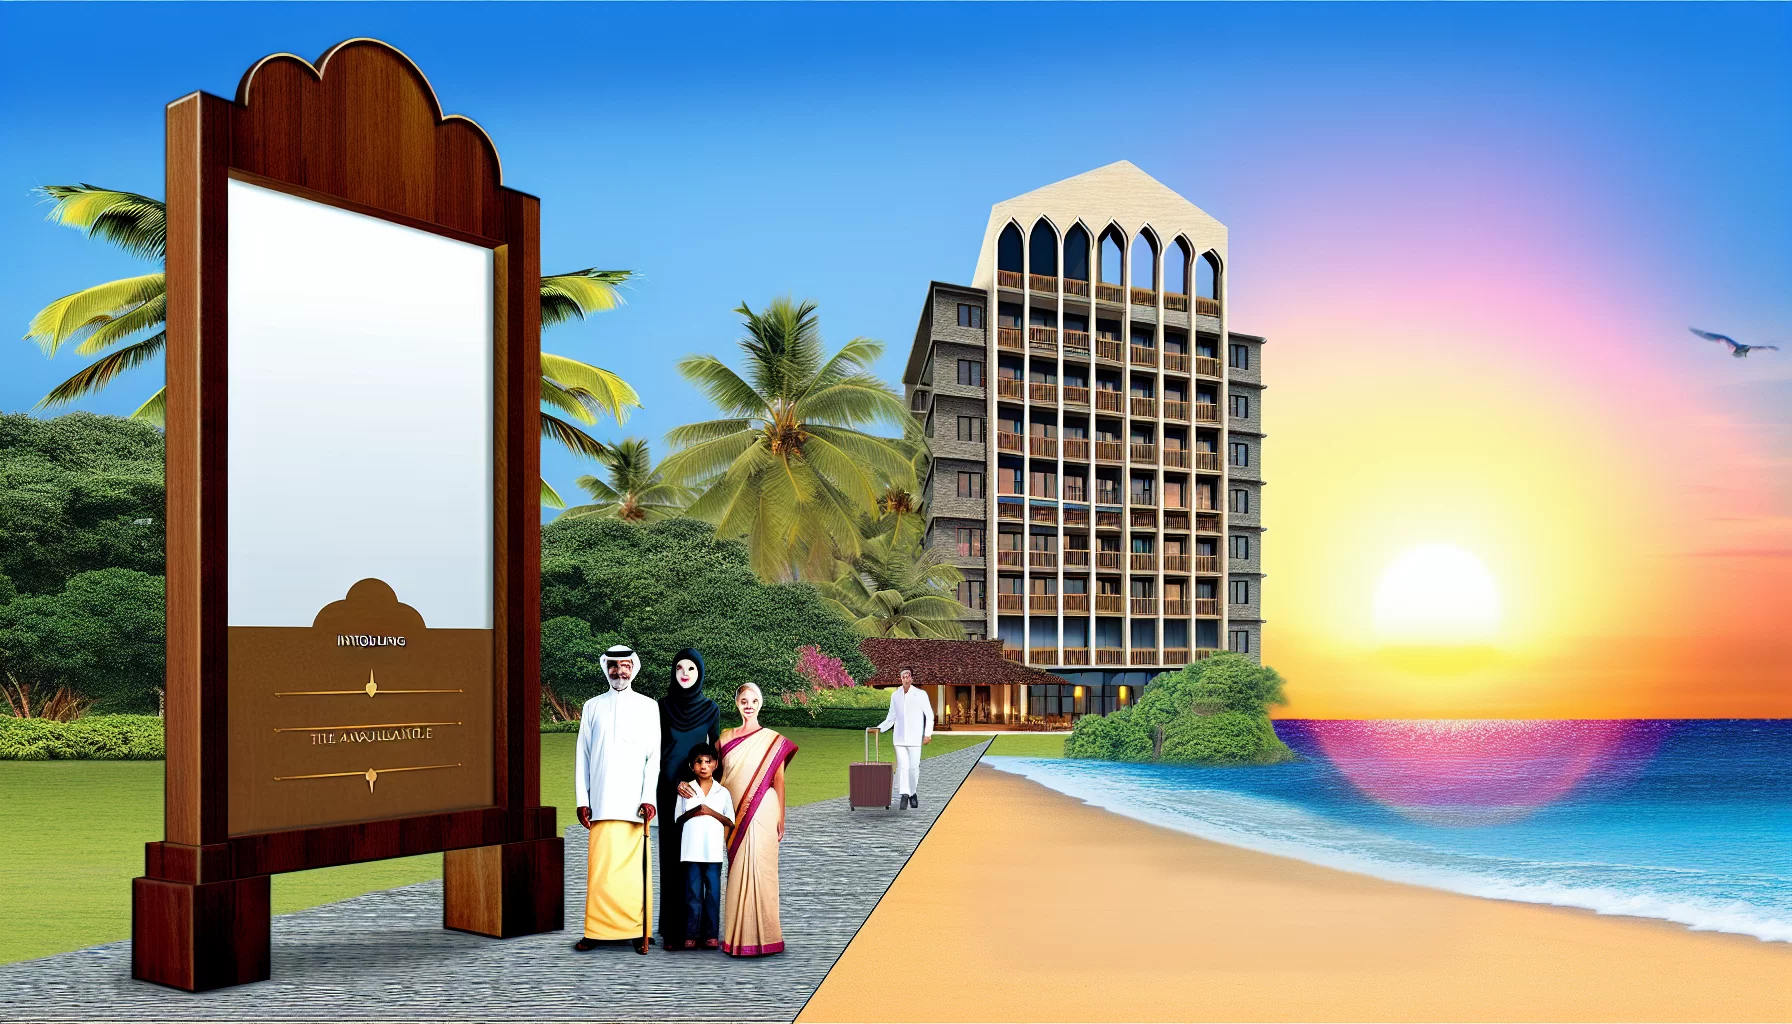 Minor hotels introduces upscale NH collection and NH brands to Sri Lanka's tourism scene